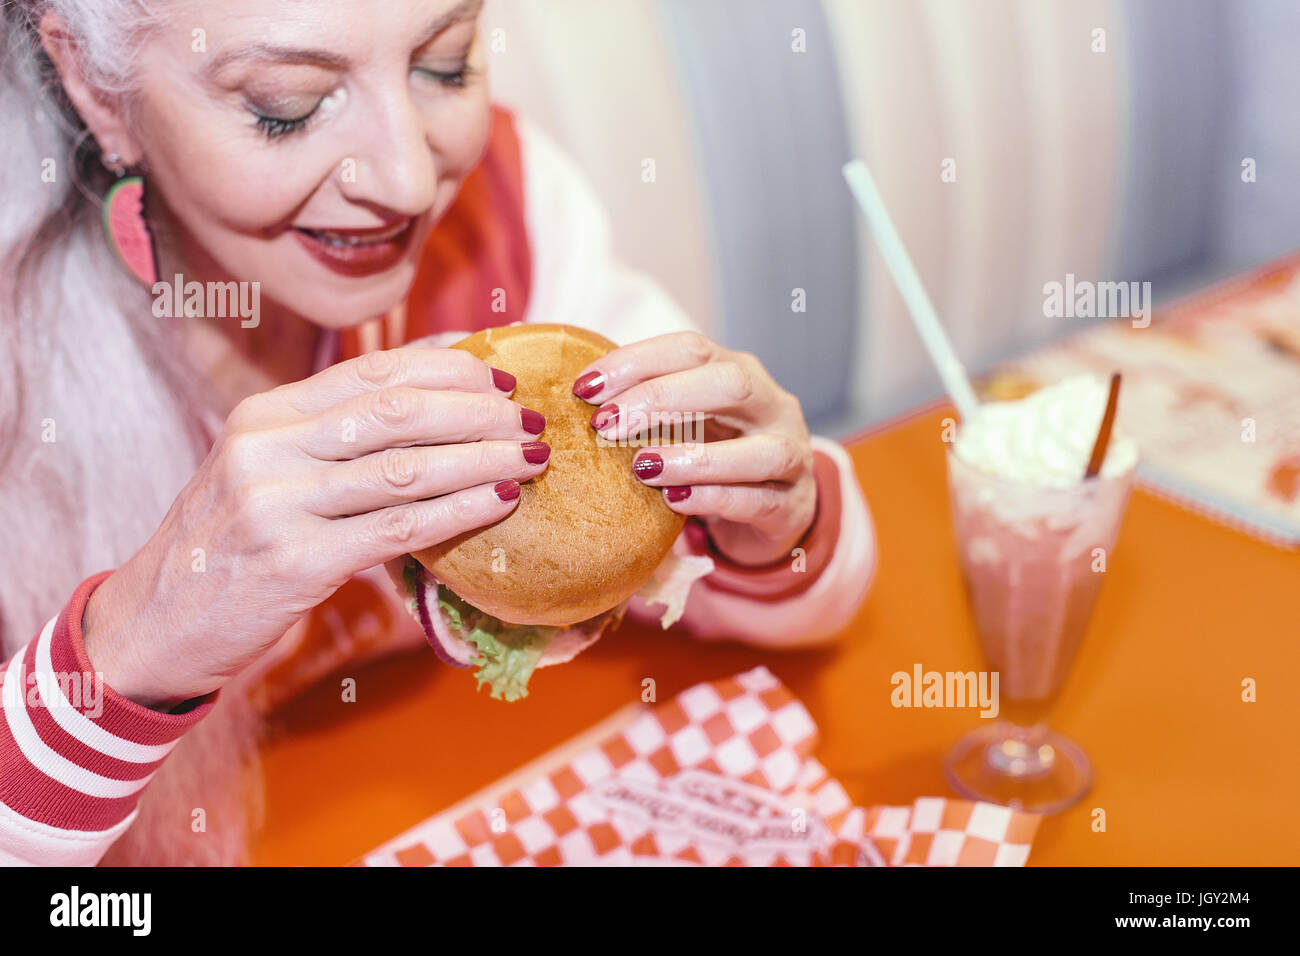 Mature woman eating burger in 1950's diner Stock Photo